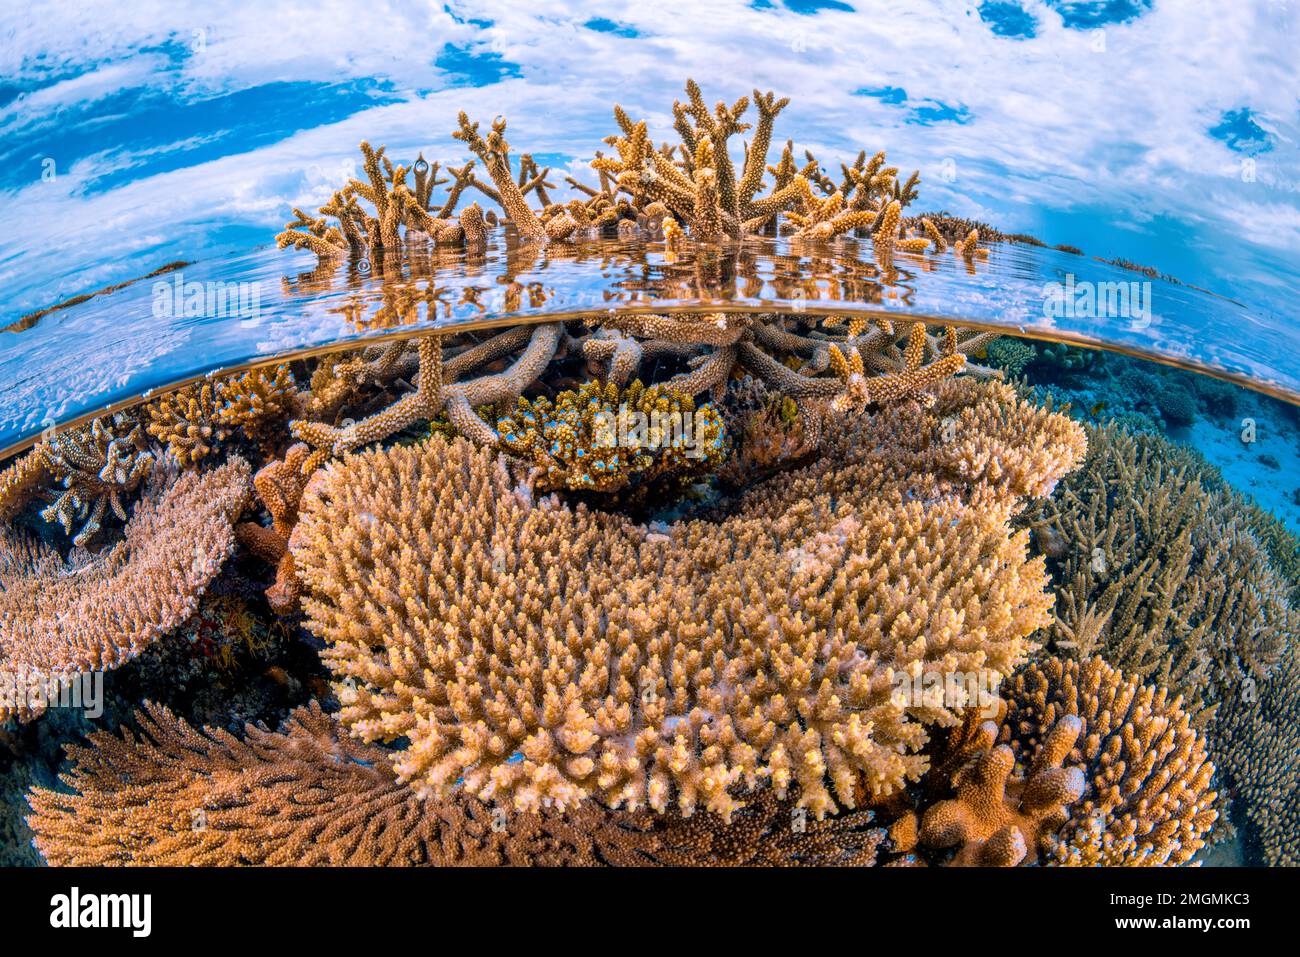 The Caribbean coral Acropora palmata will not vanish without a fight •